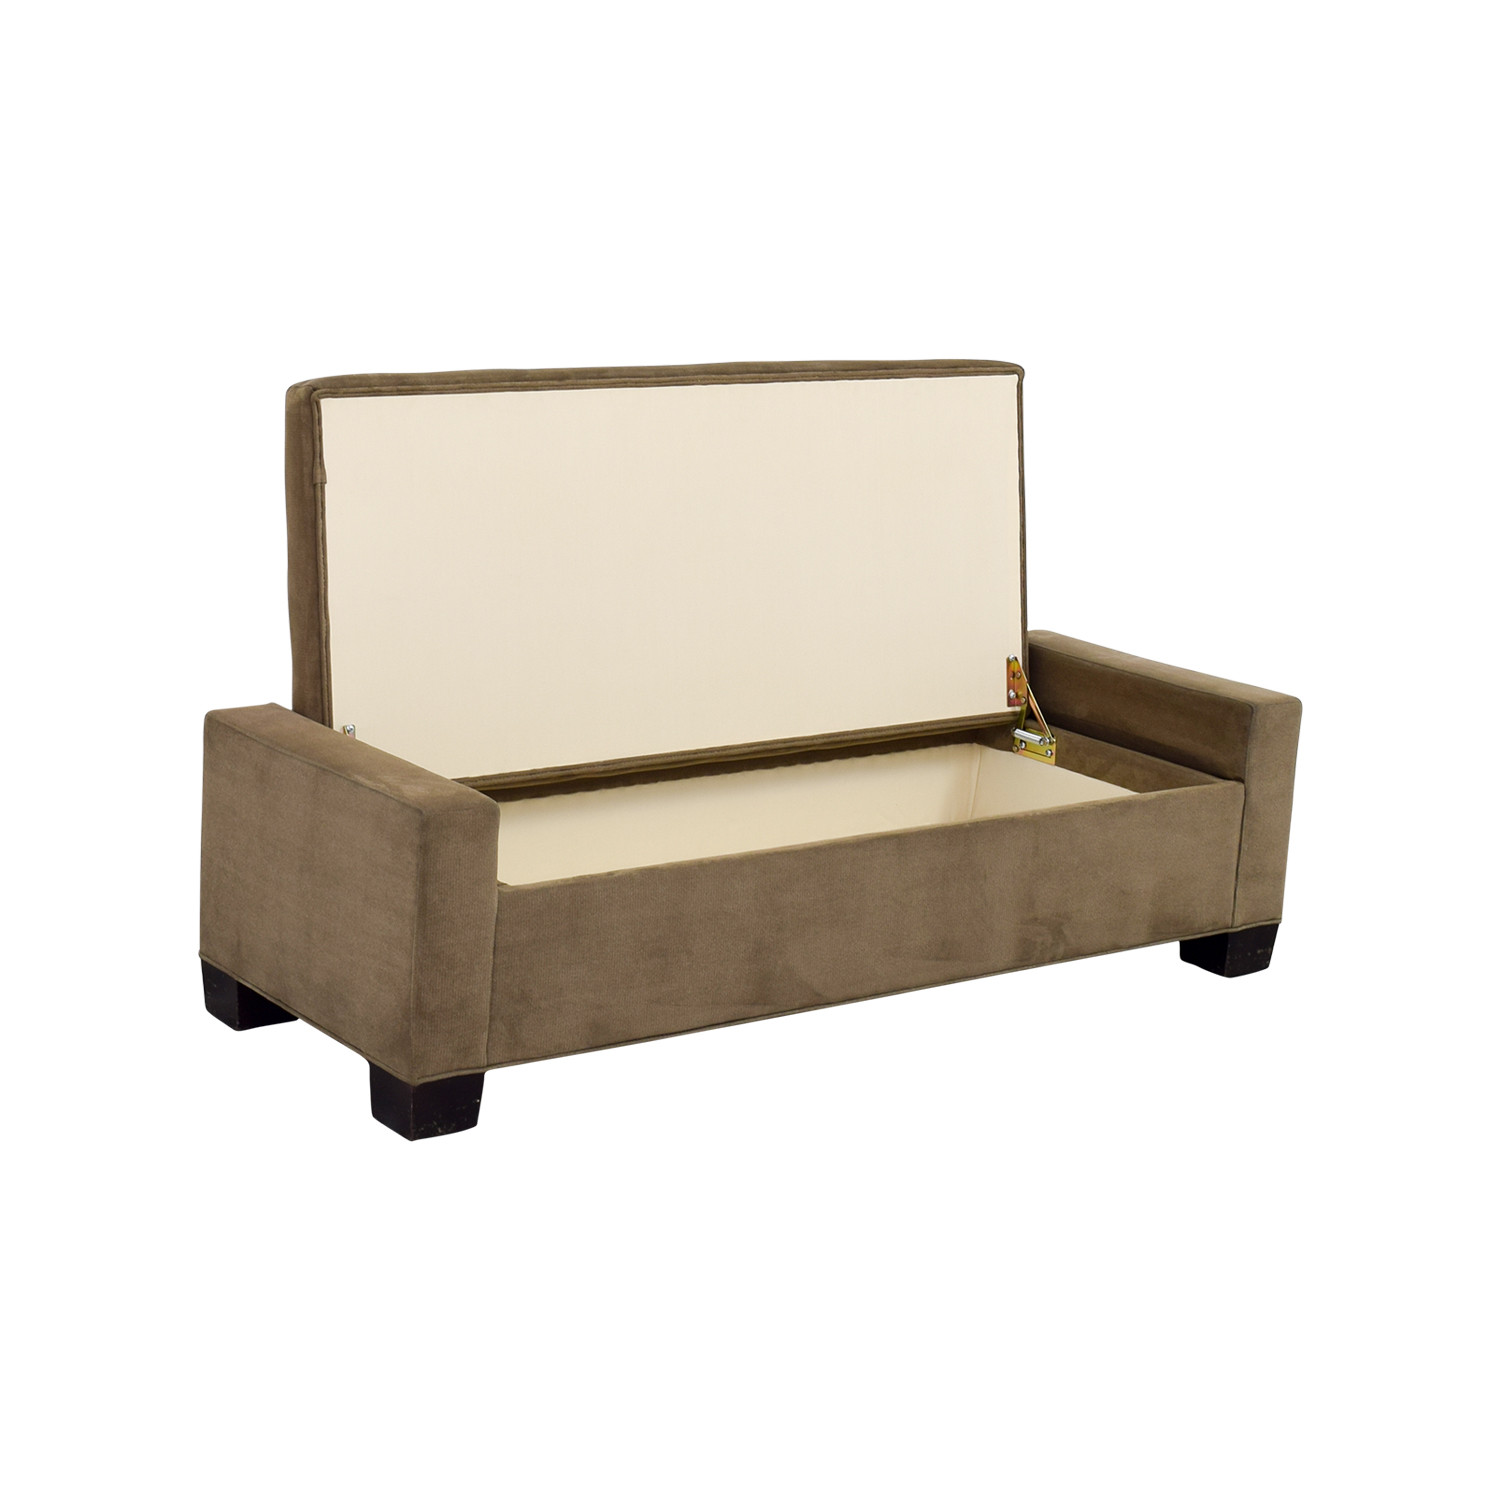 Crate And Barrel Storage Bench
 OFF Crate & Barrel Crate & Barrel Brown Tufted